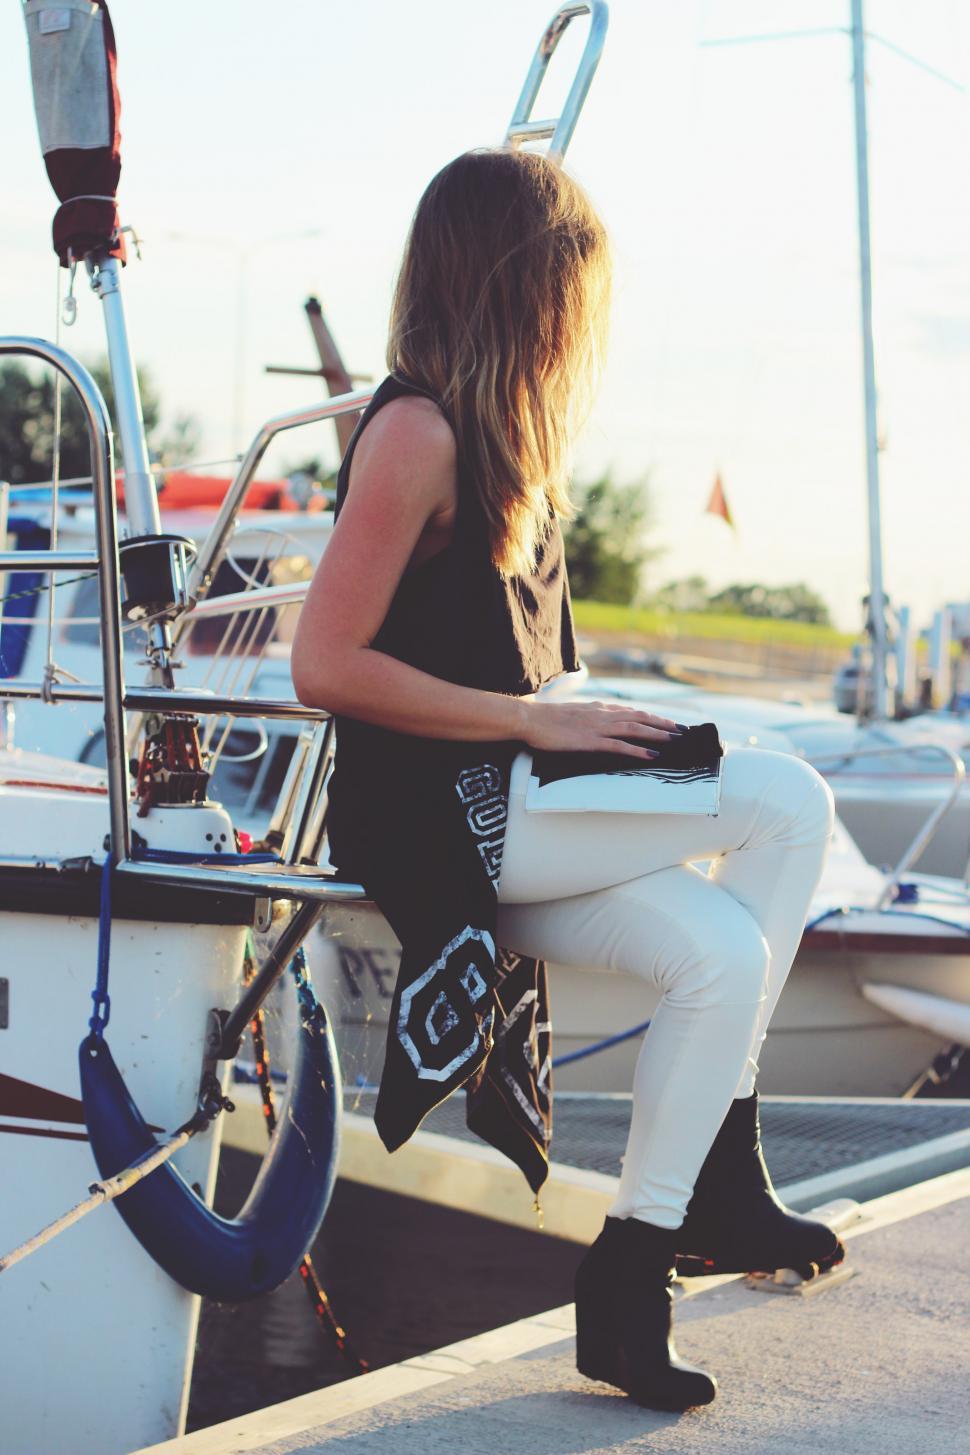 Free Image of Woman Sitting on the Edge of a Boat 